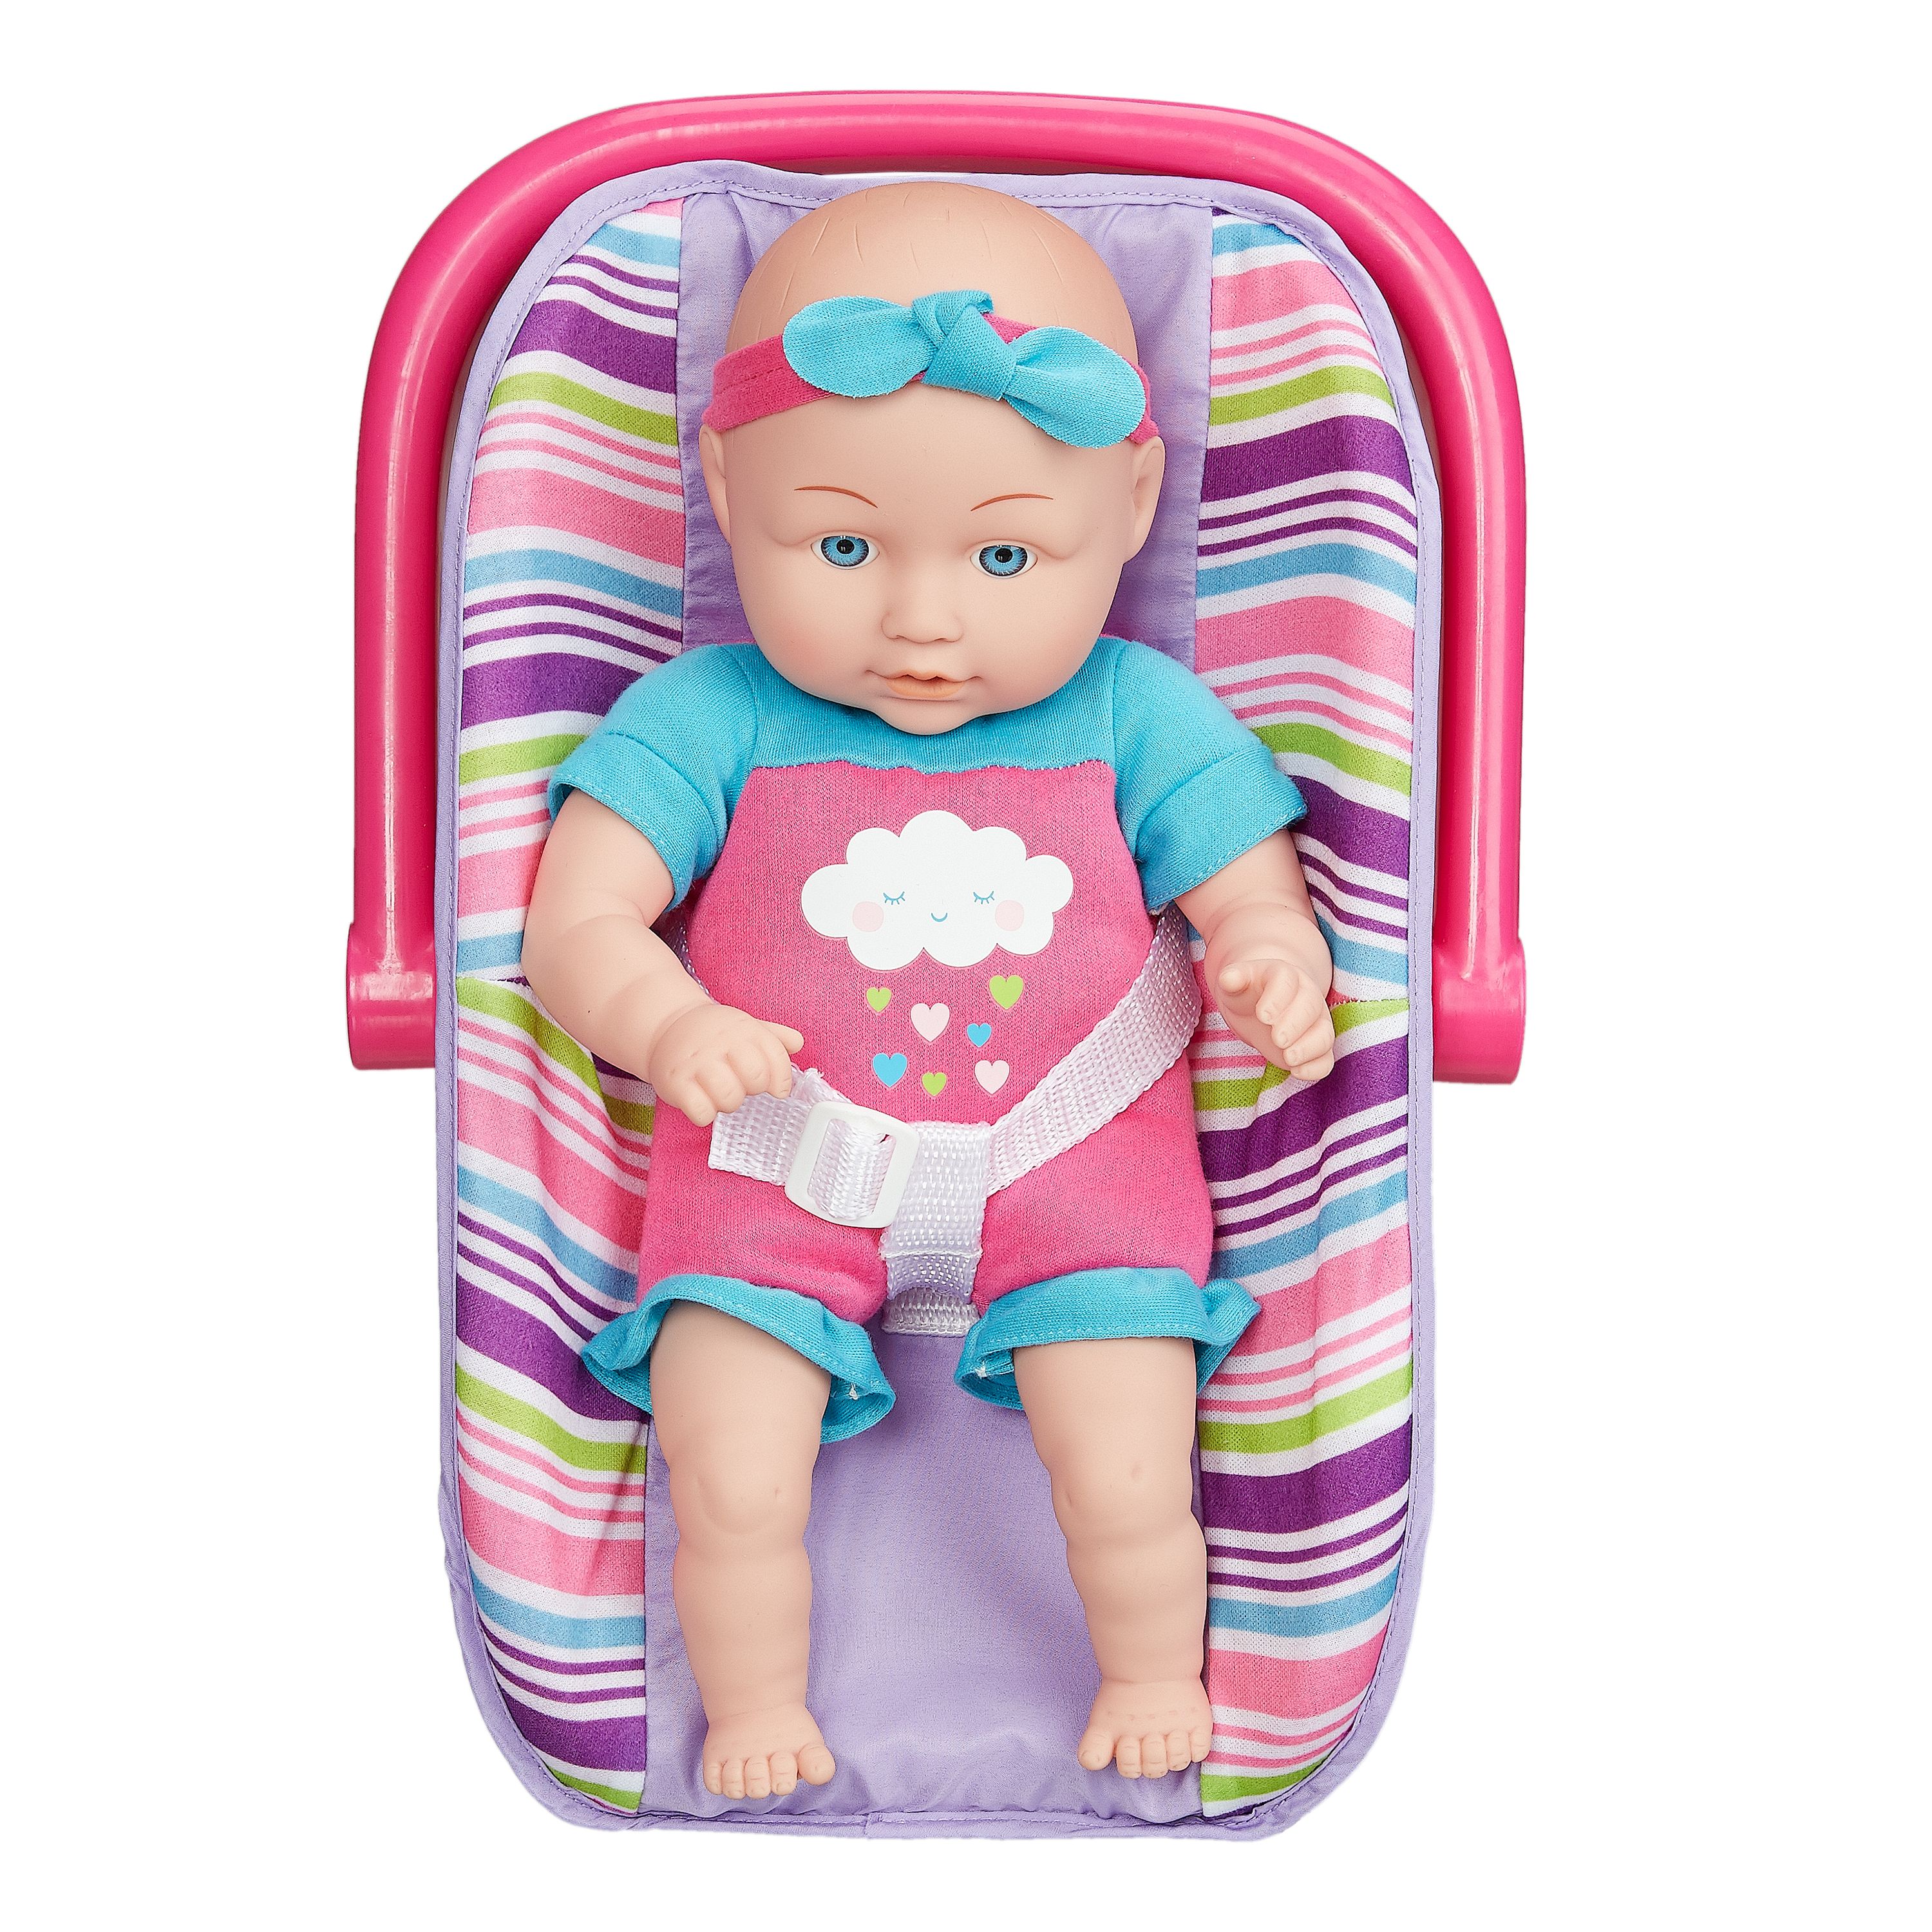 My Sweet Love 13" Baby with Carrier Play Set Doll Pink 4-Piece - image 3 of 4